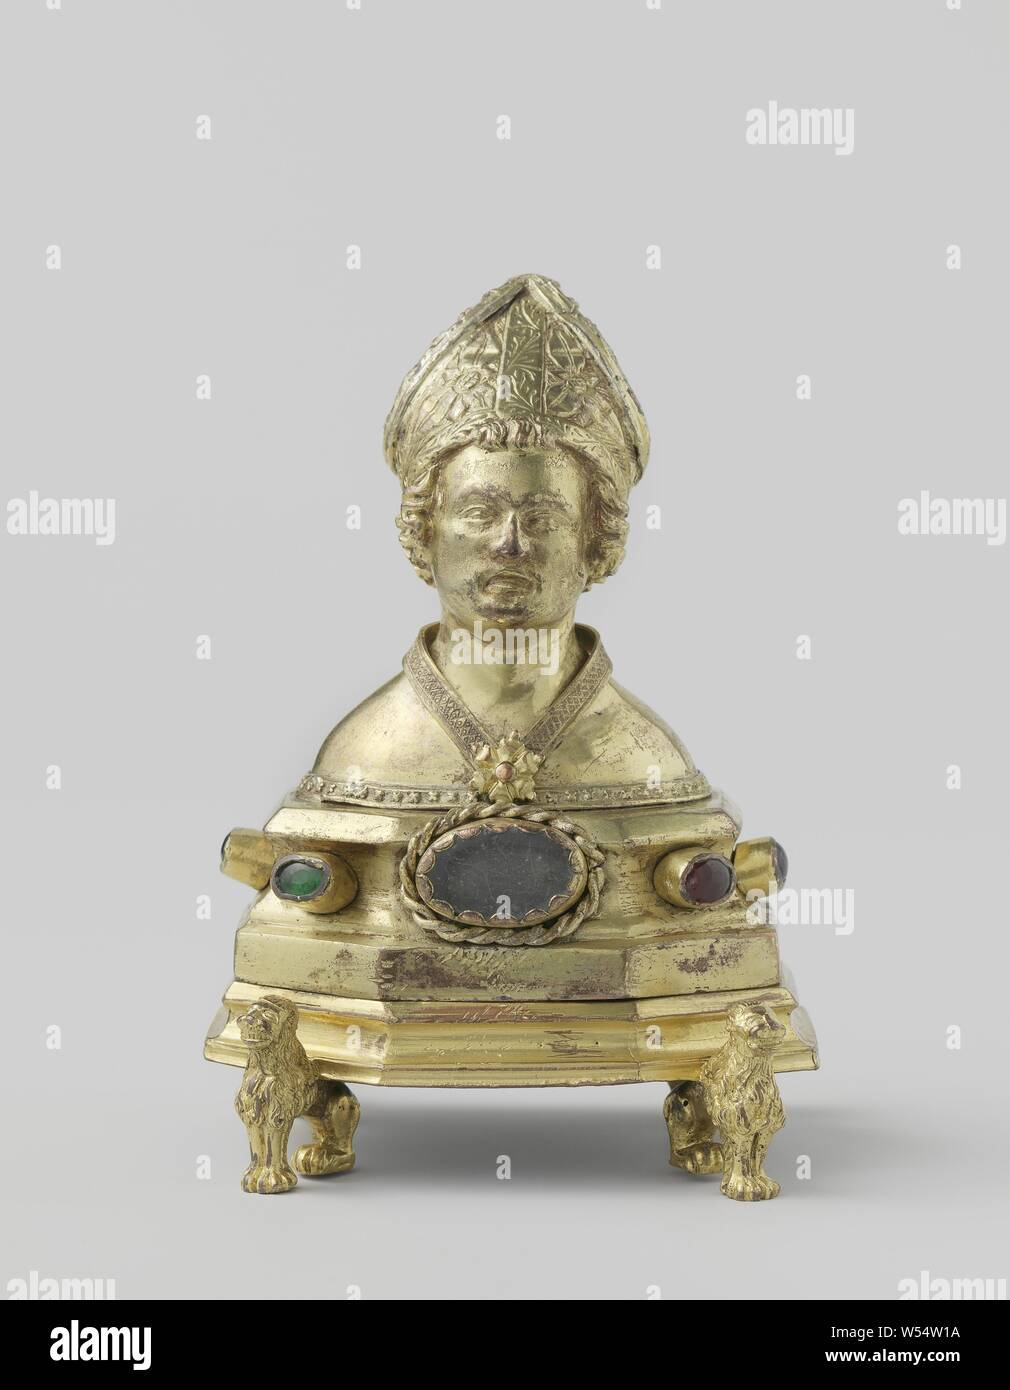 Reliquary Reliquary holder in the form of a bust of a bishop, The object consists of the following cast and hammered main parts: the bust with the pedestal, the base under the pedestal and the four lions. The bust represents a bishop, a middle-aged man, with a shaved face, curly hair reaching down to the neck, and a few strands that rise above the forehead just below the miter. The miter, which is covered from above, is adorned with bands that are arranged both along the edges and across the centers towards the miter points. They feature engraved tendrils ornament or trimmed with cast sheet Stock Photo